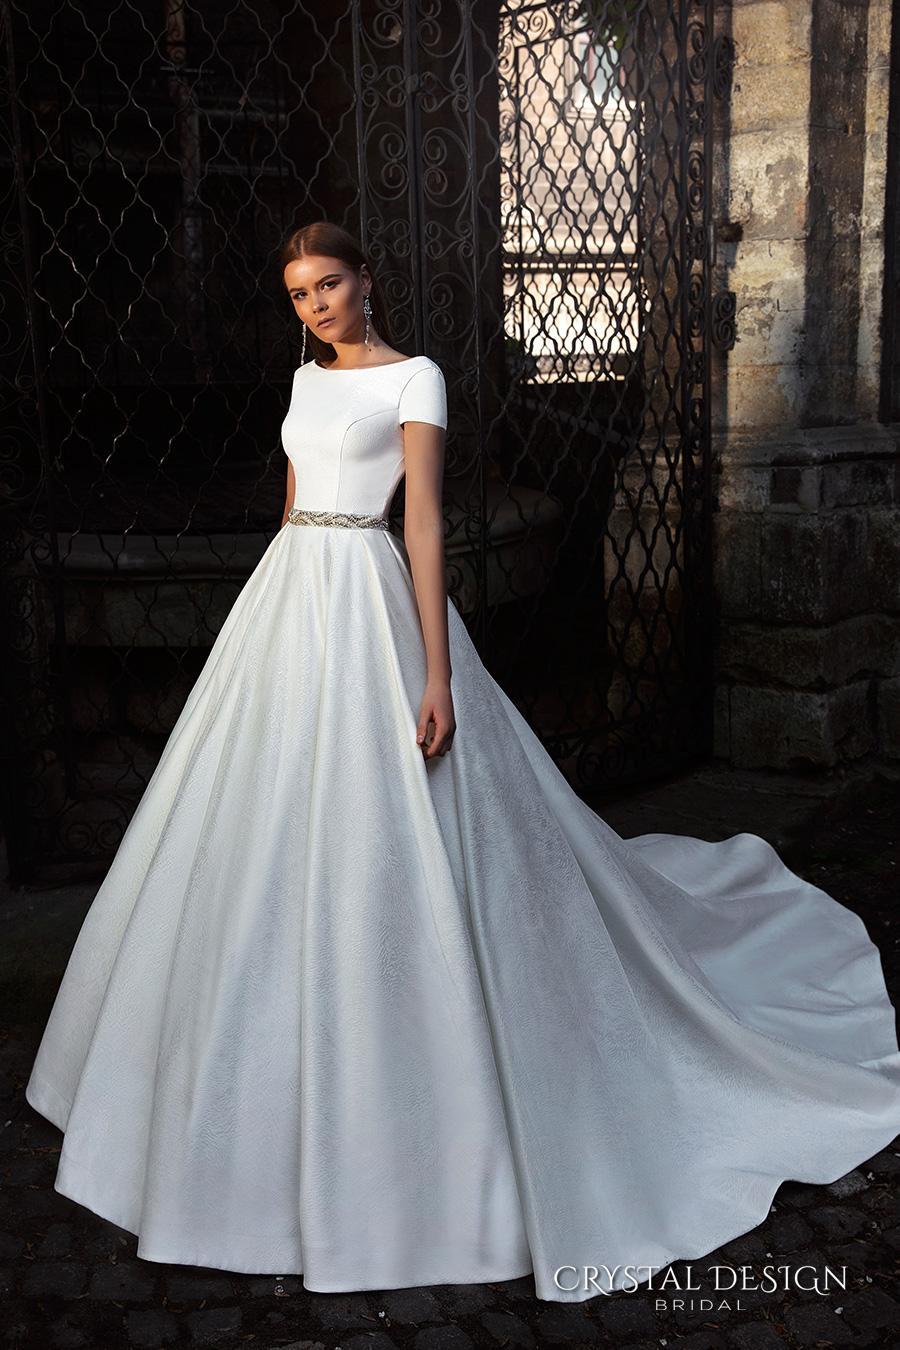 Wedding - New Arrival Short Sleeve Backless Crystal Design 2016 Wedding Dresses Beaded Sash Bridal Ball Gowns Wedding Dress Online with $116.84/Piece on Hjklp88's Store 